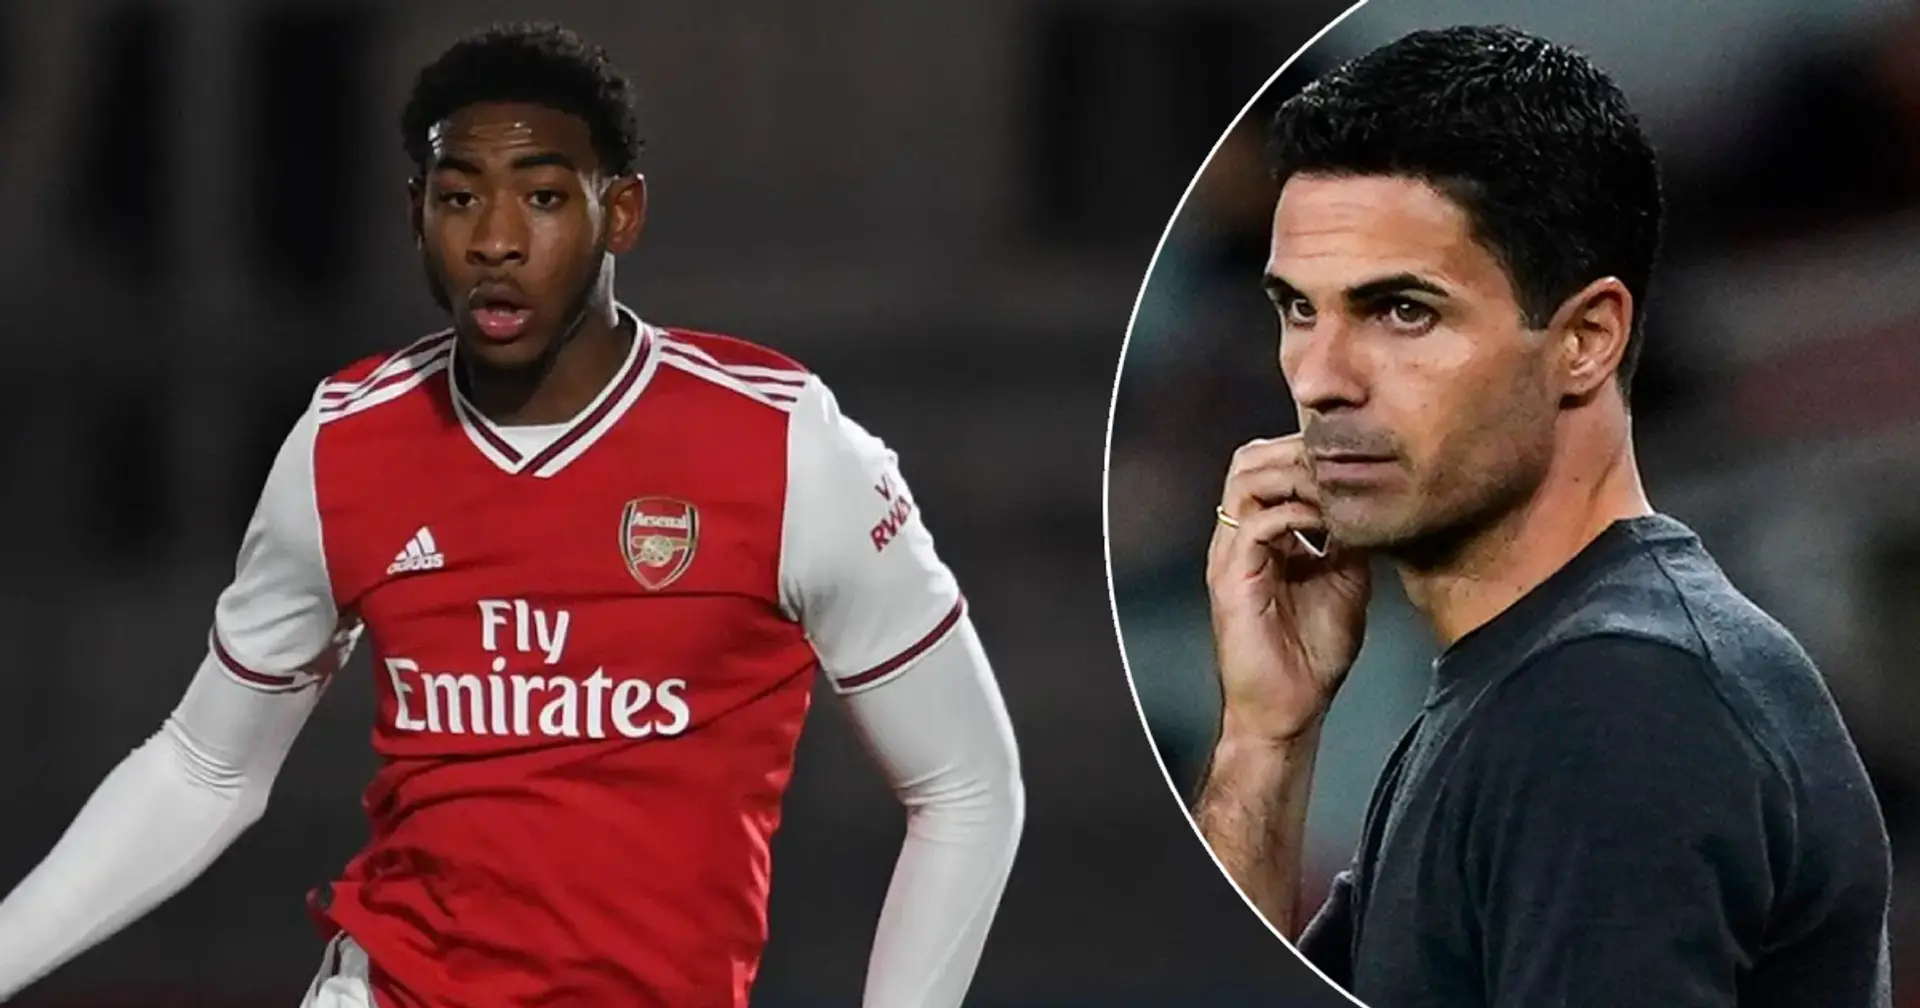 Arsenal promising defender Zech Medley set to leave the club permanently (reliability: 5 stars)